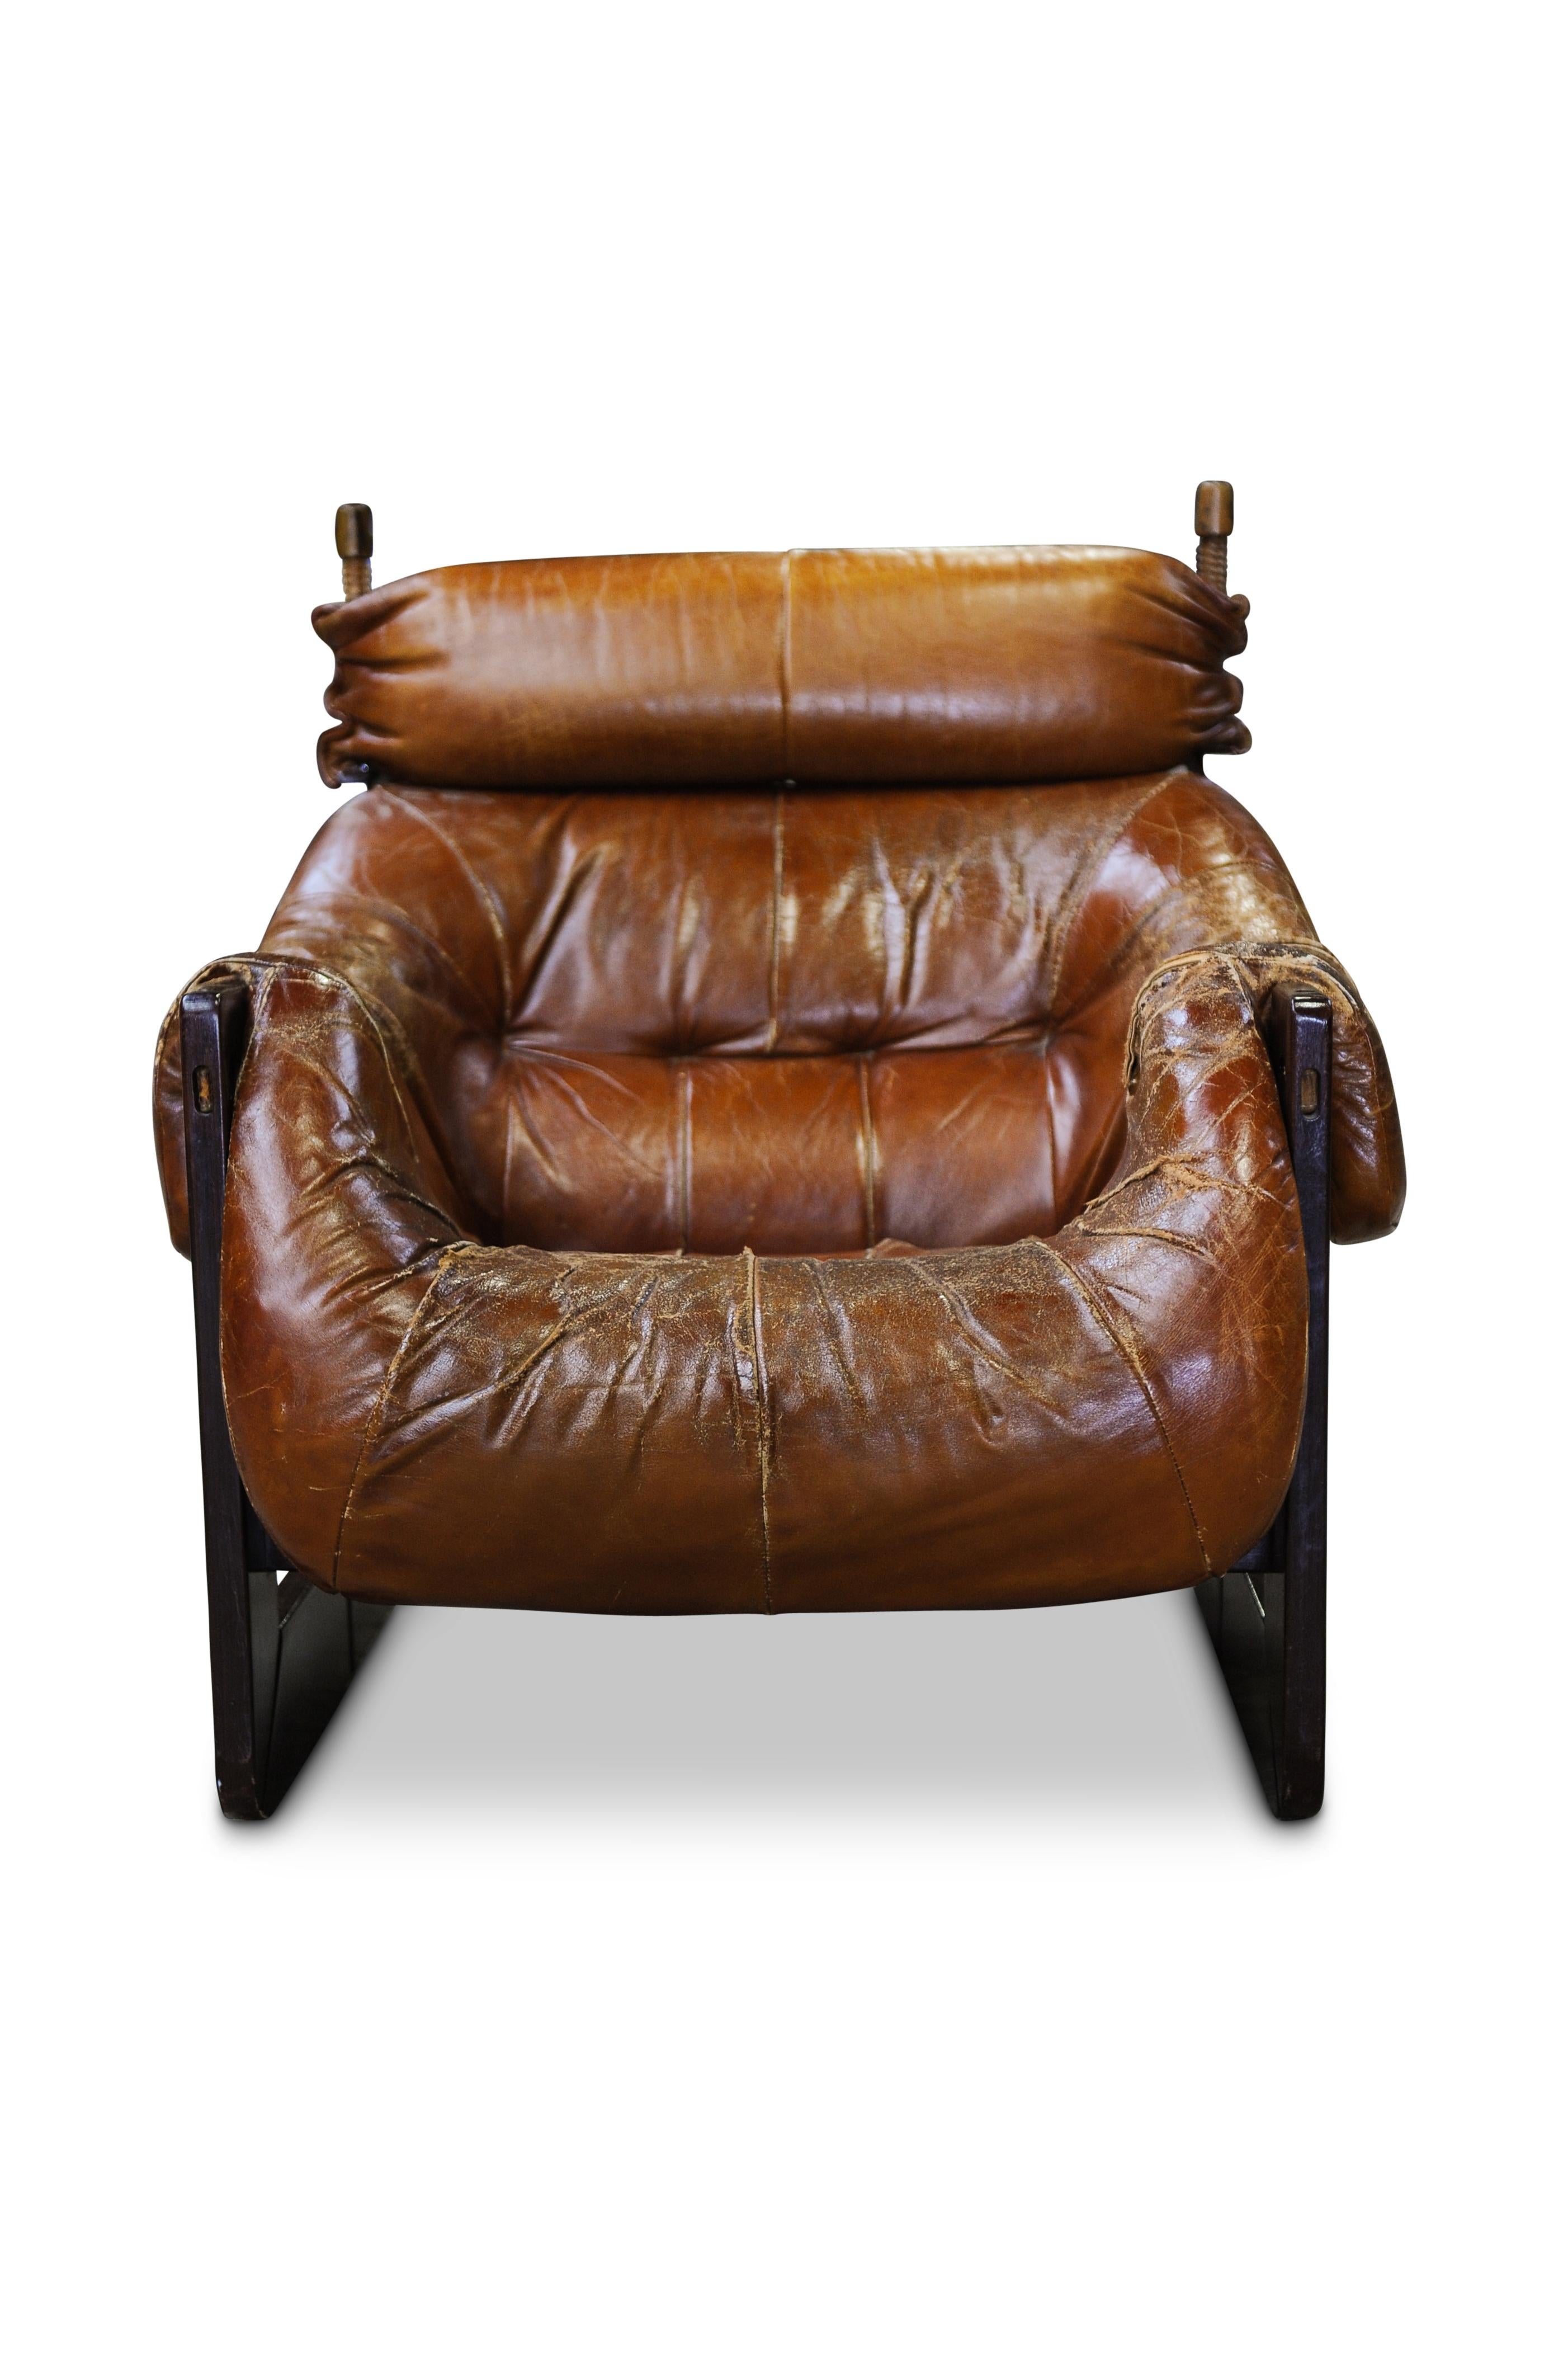 MP97 armchair with frame in Jatobah wood with rosewood finish and upholstered in glove leather by Percival Lafer, Brazilian, 1970s.

CITES Papers for chair available for selling to the US.

 Item has extensive wear to leather and seams requiring